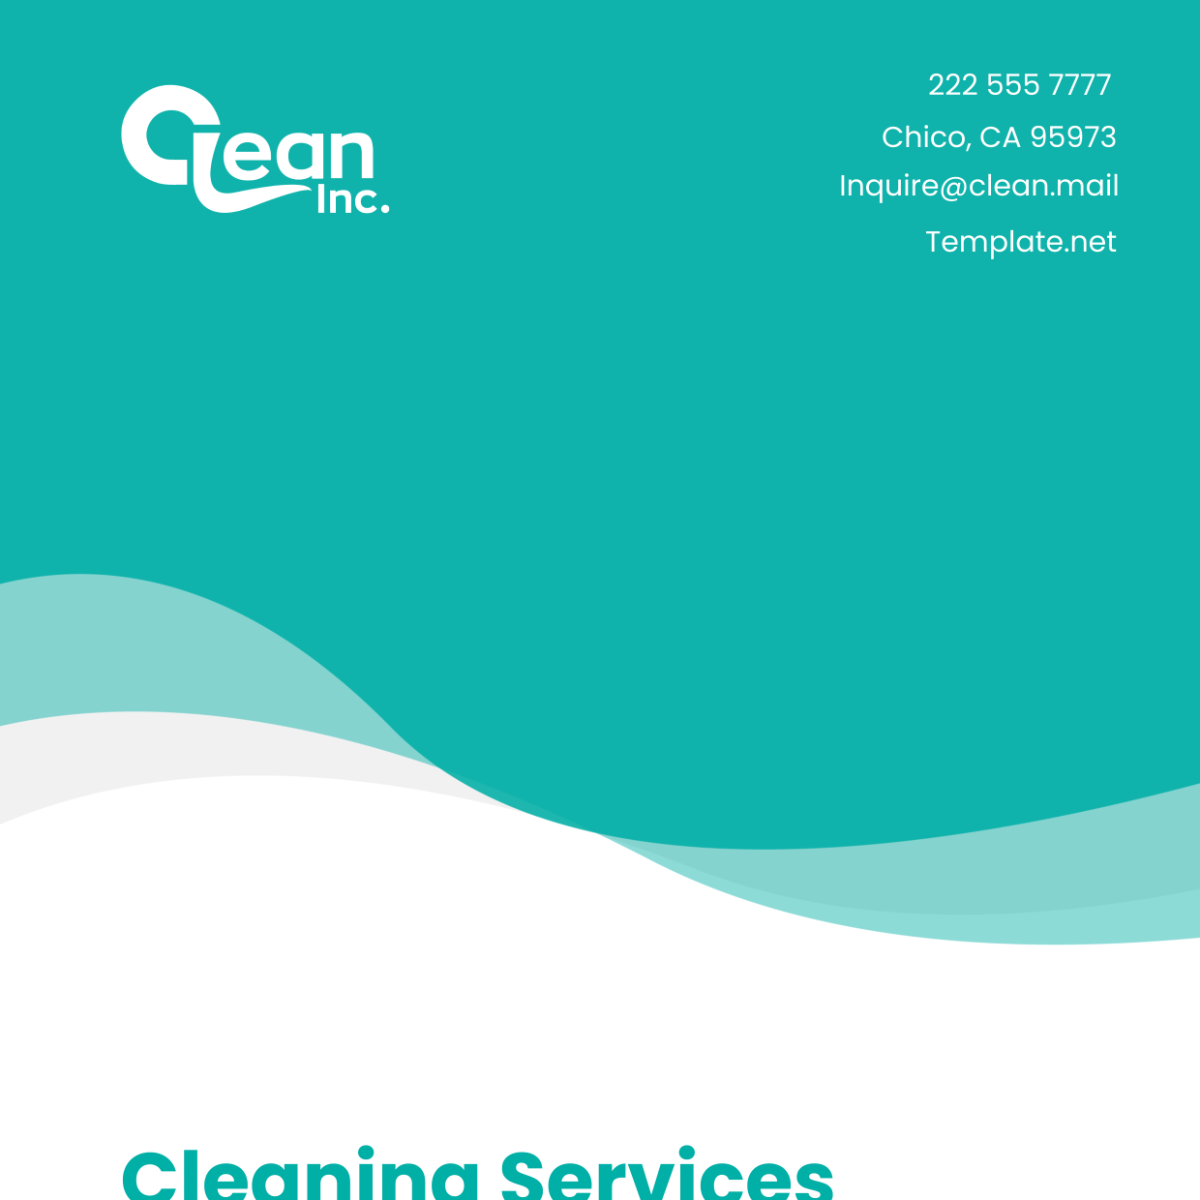 Cleaning Services Leadership Ethics Policy Template